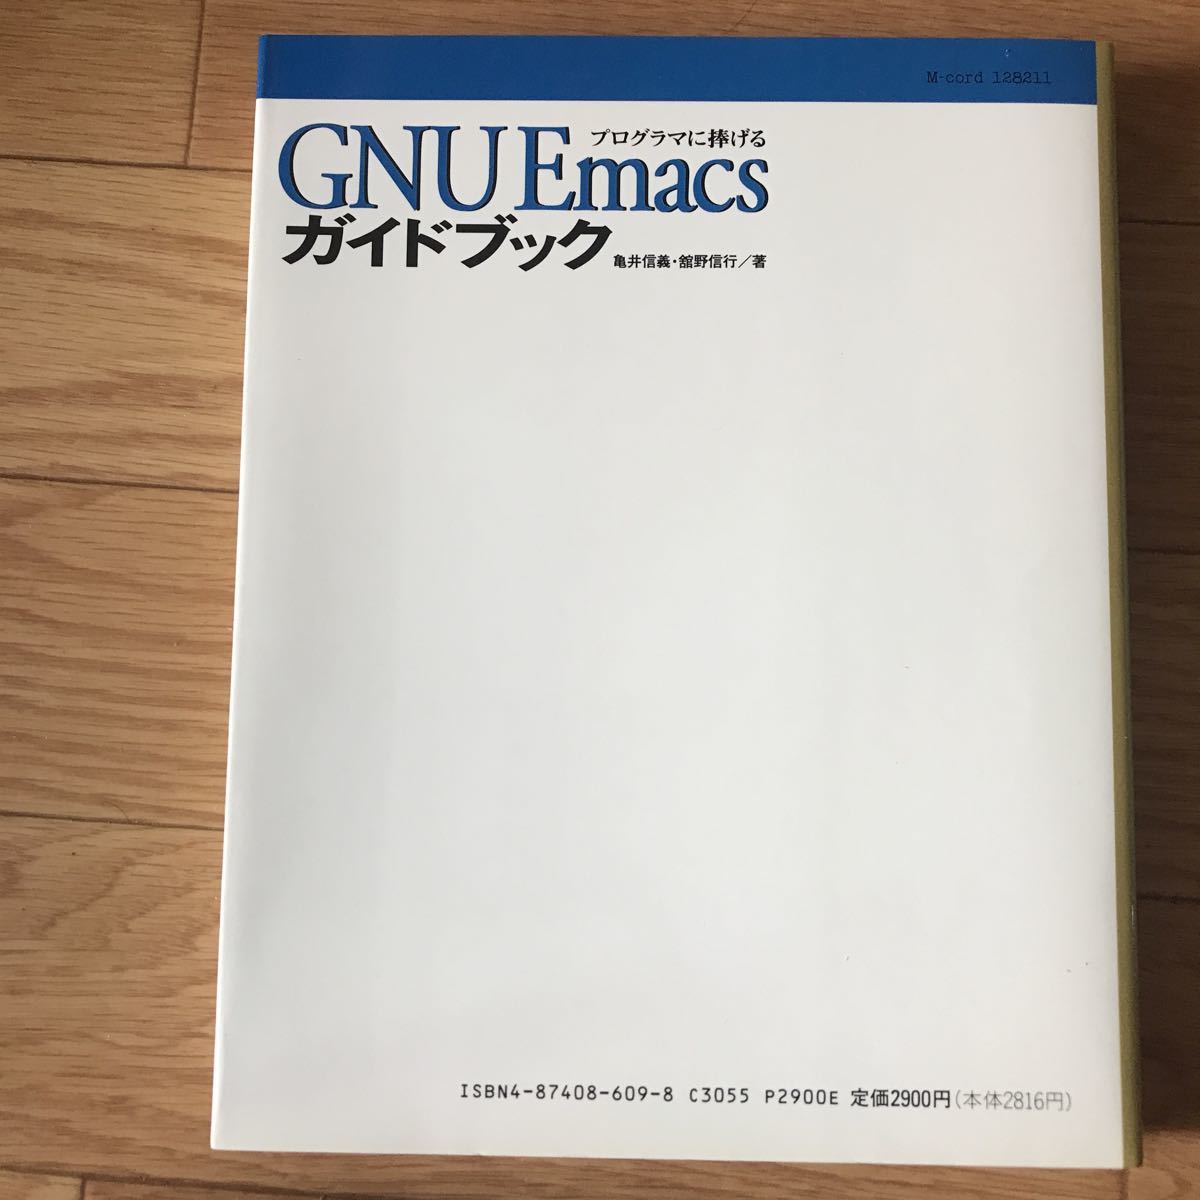 GNU Emacs guidebook turtle . confidence .,.. confidence line work the first version no. 1.